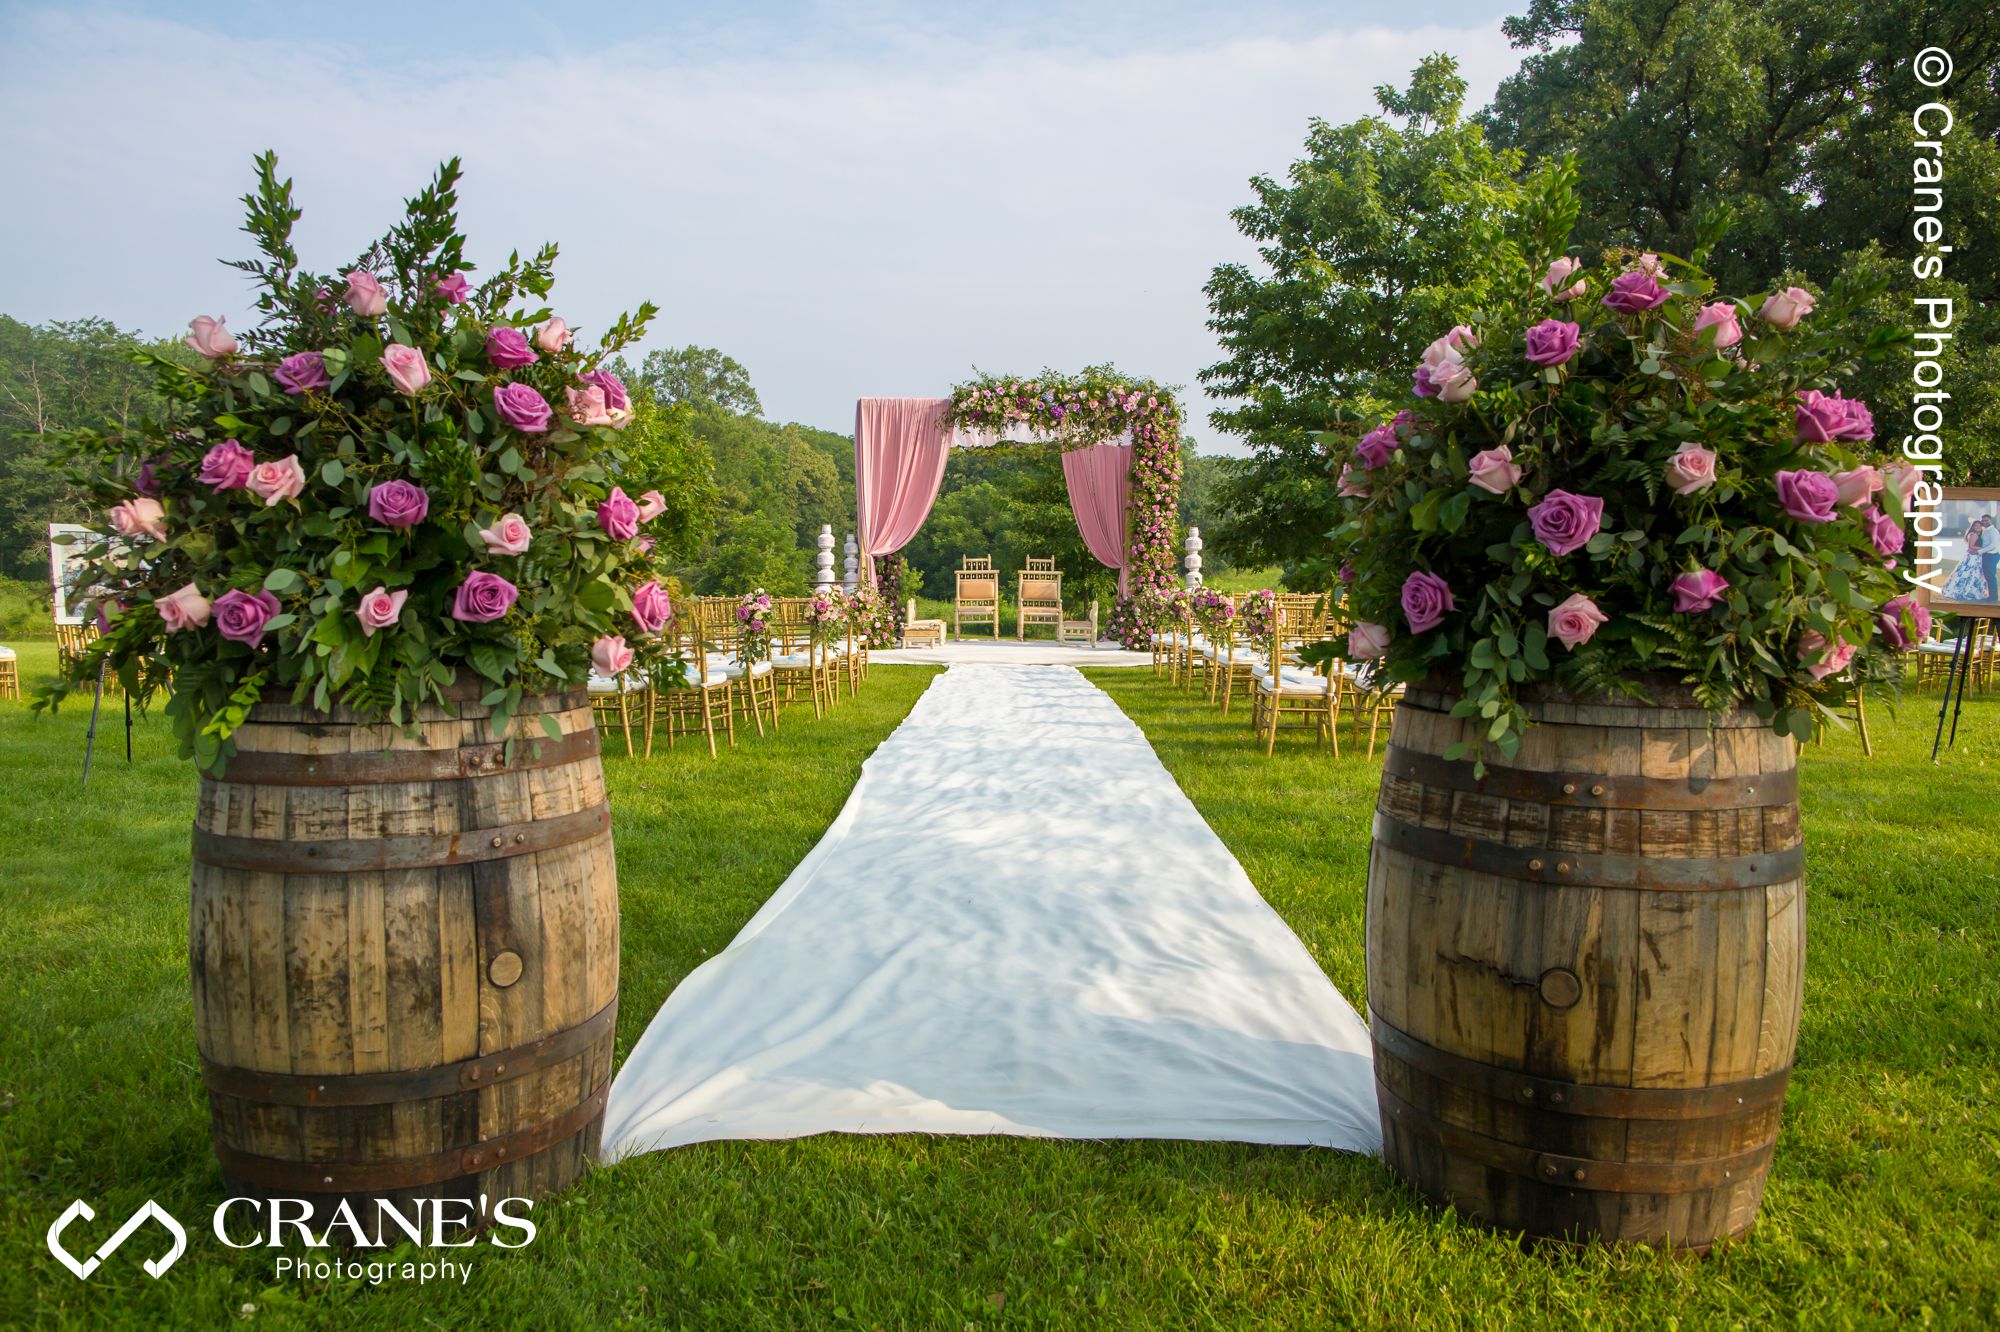 An outdoor Indian wedding mandap decorated with pink linen and flowers.